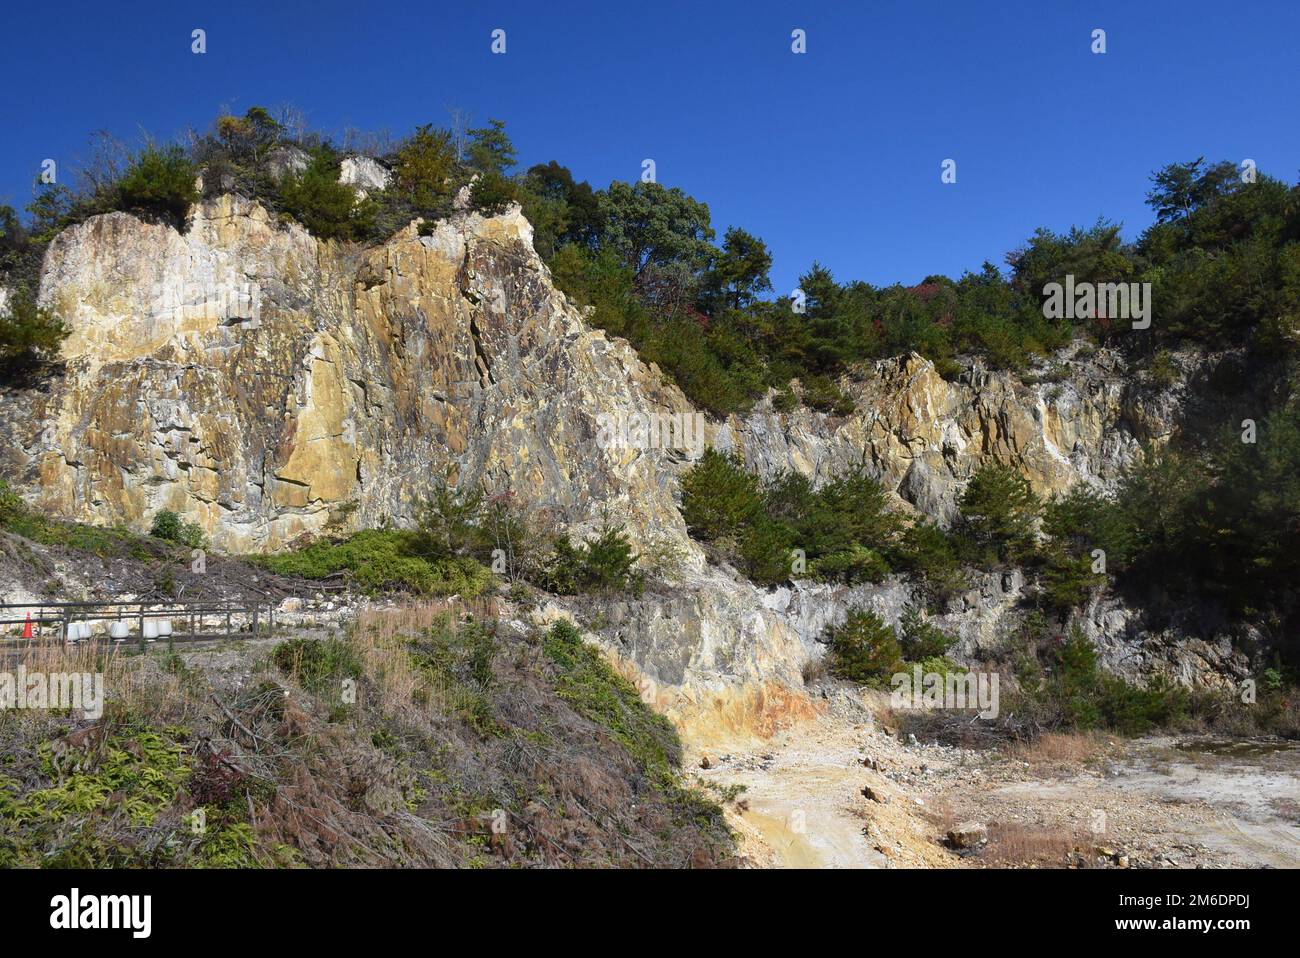 Izumiyama Kaolin Quarry in Arita, Kyushu Island. The first site discovered in Japan for kaolin, the raw material used to make porcelain clay. Stock Photo